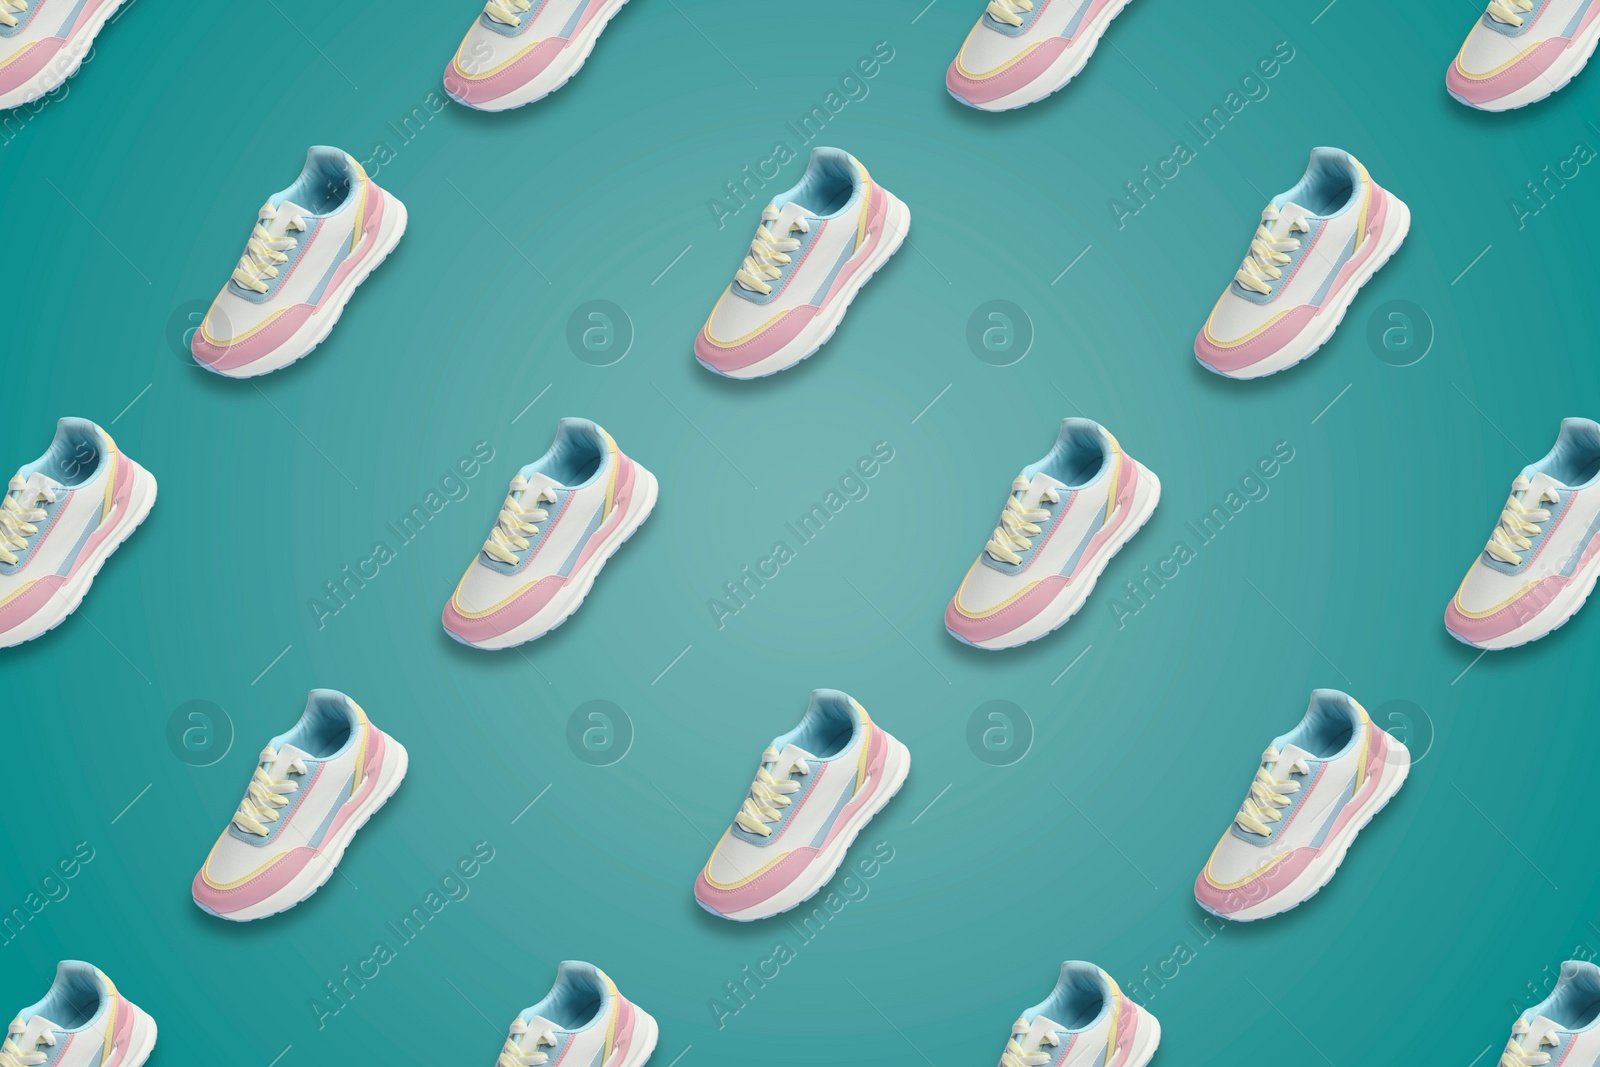 Image of Collage of stylish sneakers on light teal background